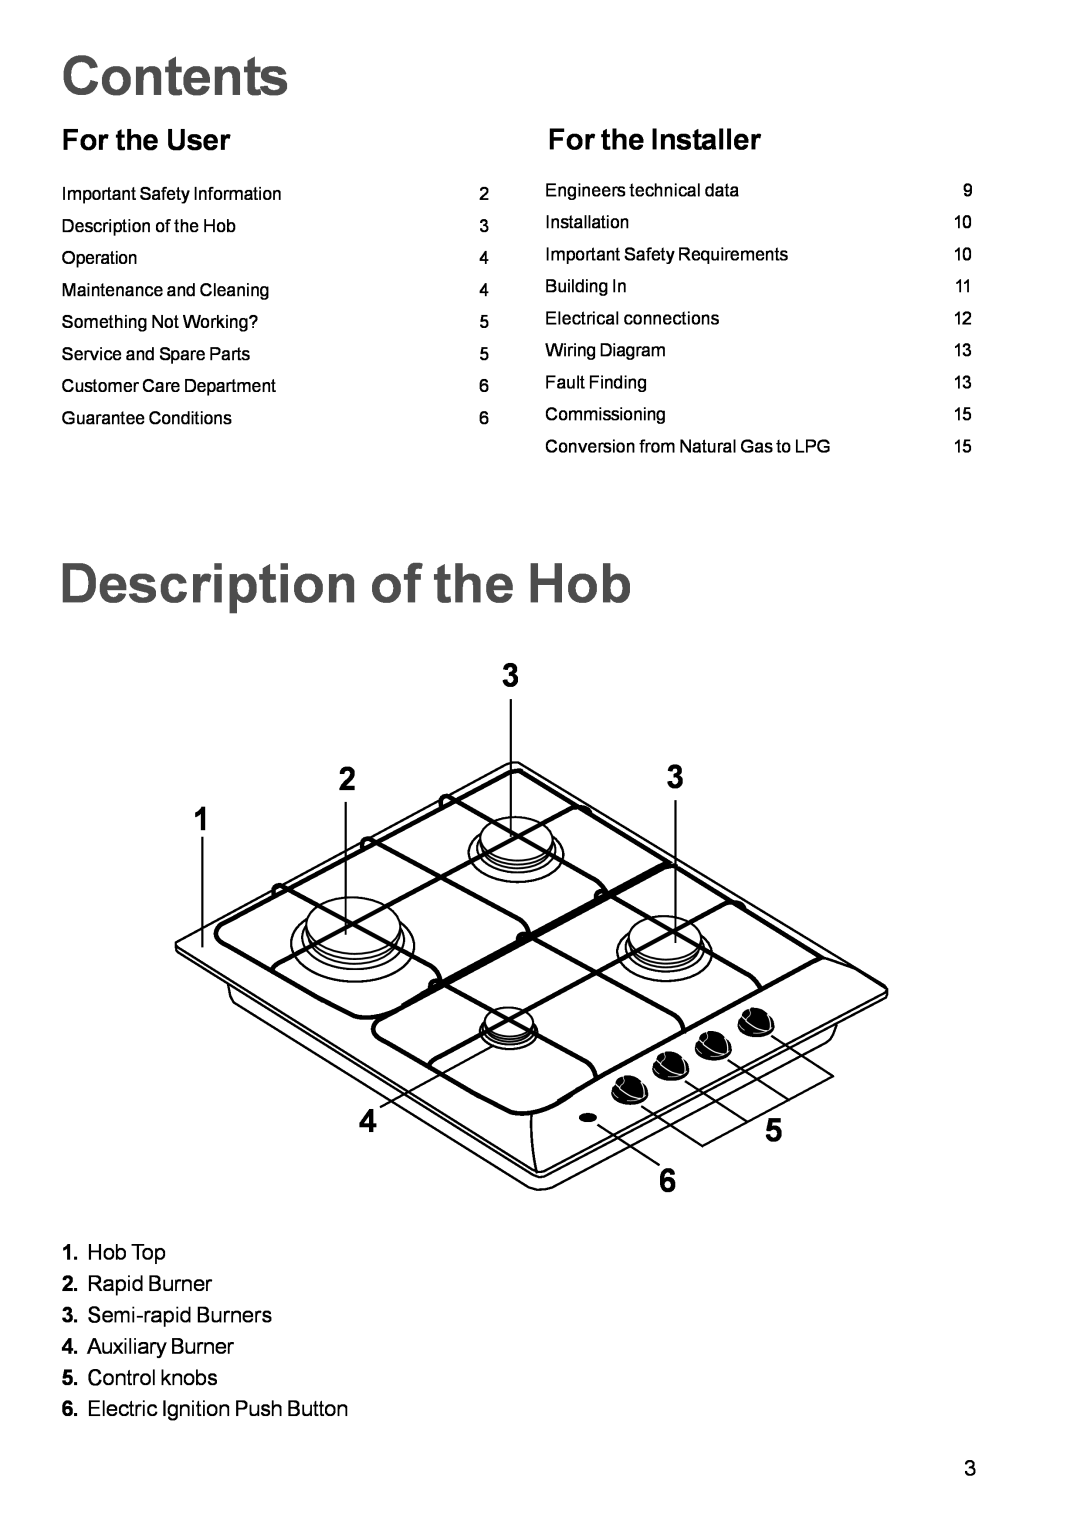 Electrolux EHG 680 manual Contents, Description of the Hob, For the User, For the Installer 